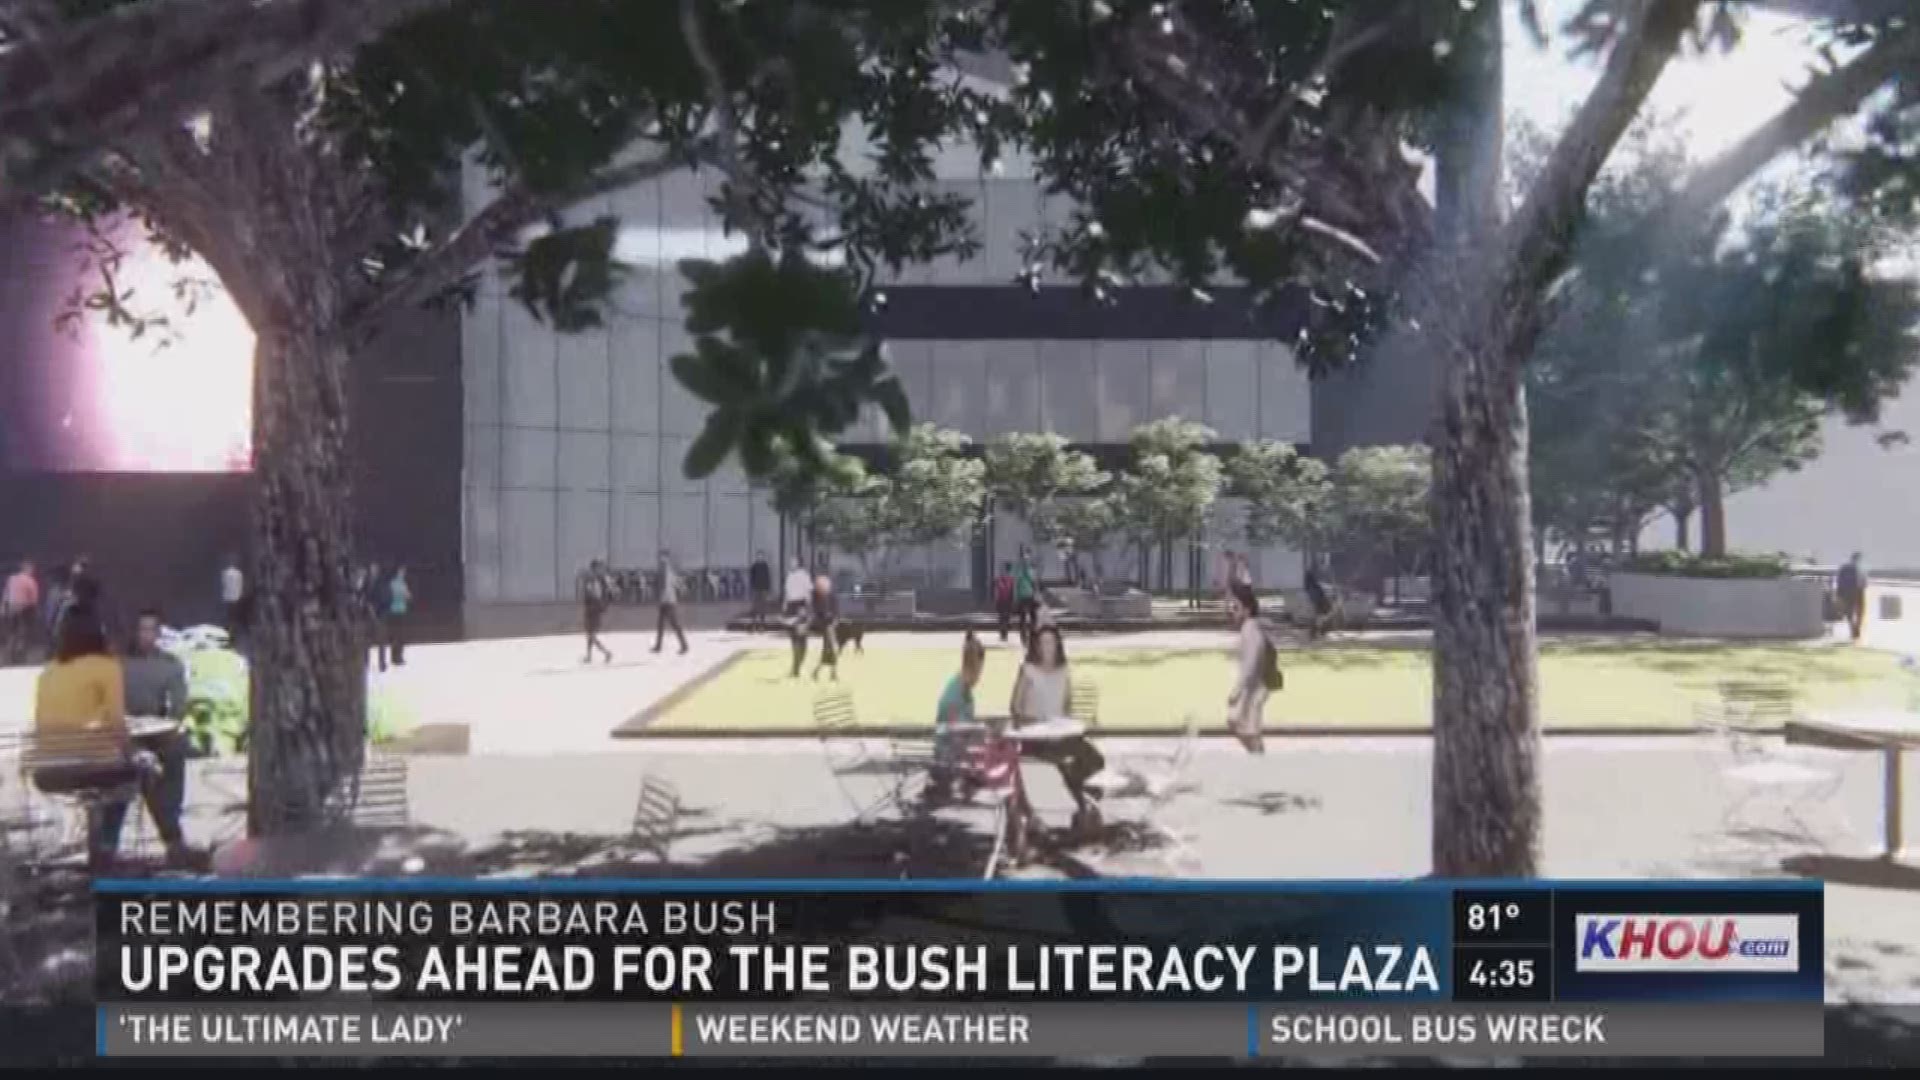 Big changes were already in the works on the Barbara Bush Literacy Plaza in Houston ahead of the former first lady's death.